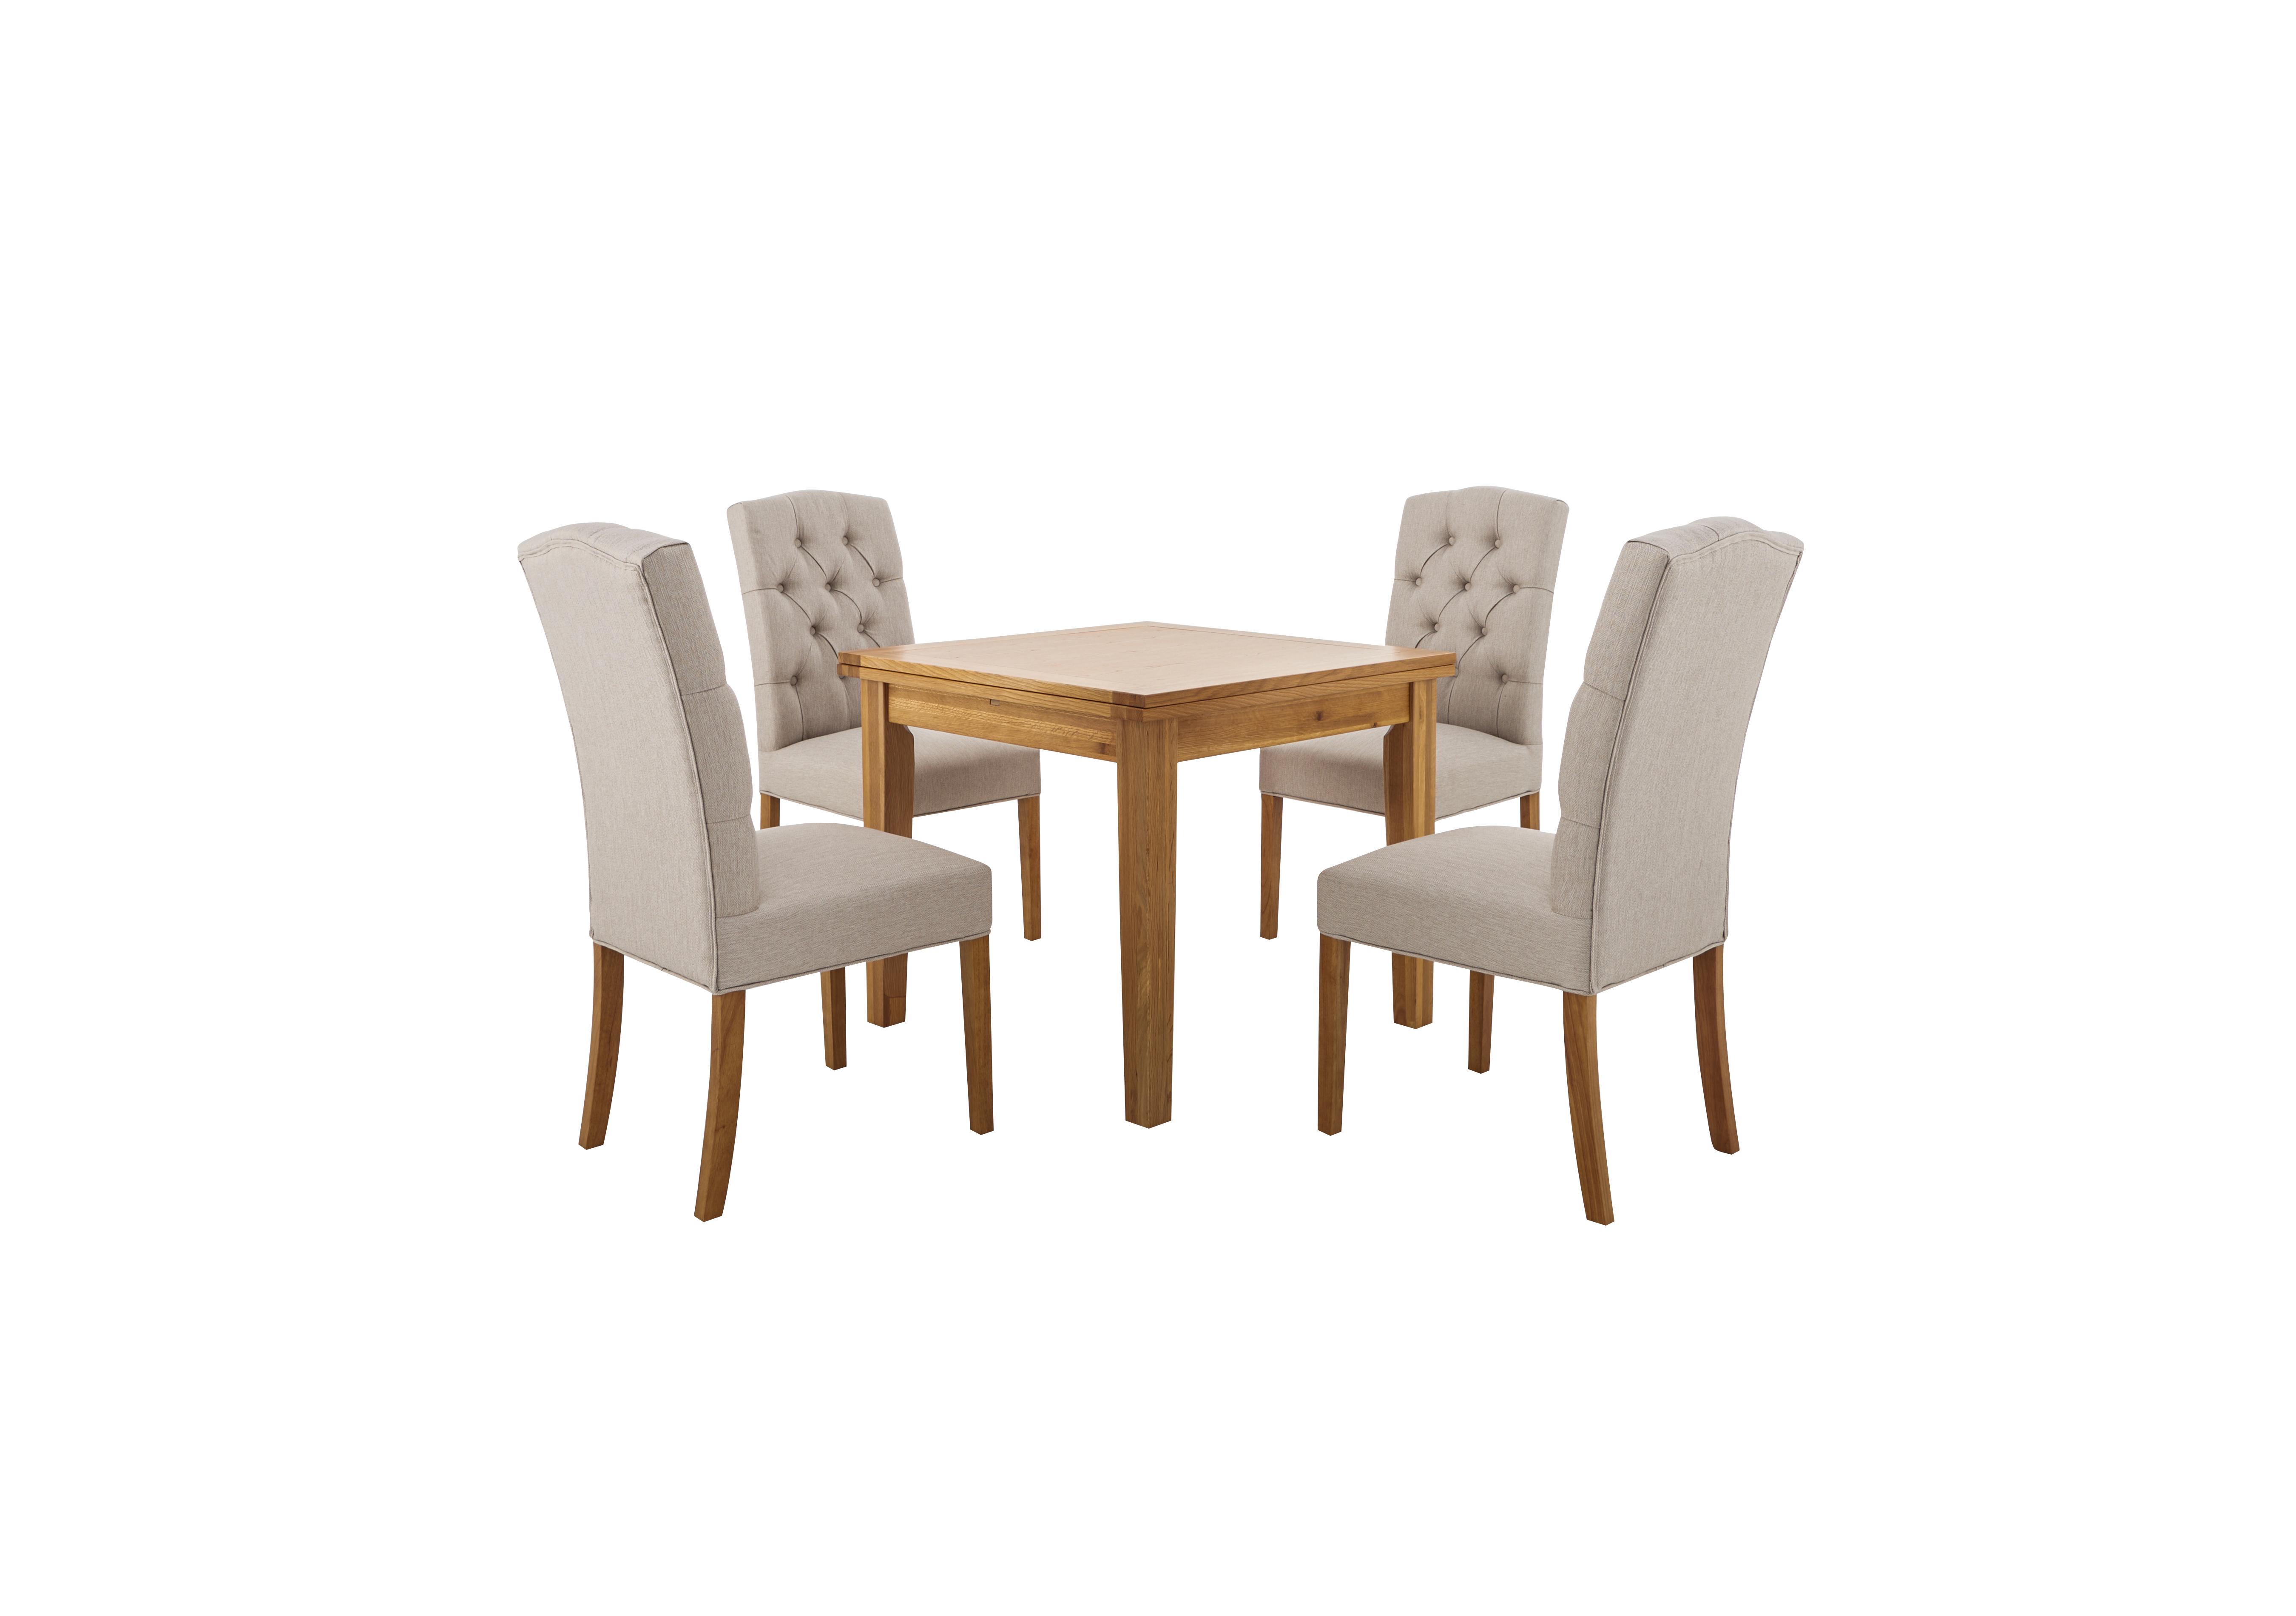 California Solid Oak Flip Top Extending Table and 4 Button Back Upholstered Chairs in  on Furniture Village